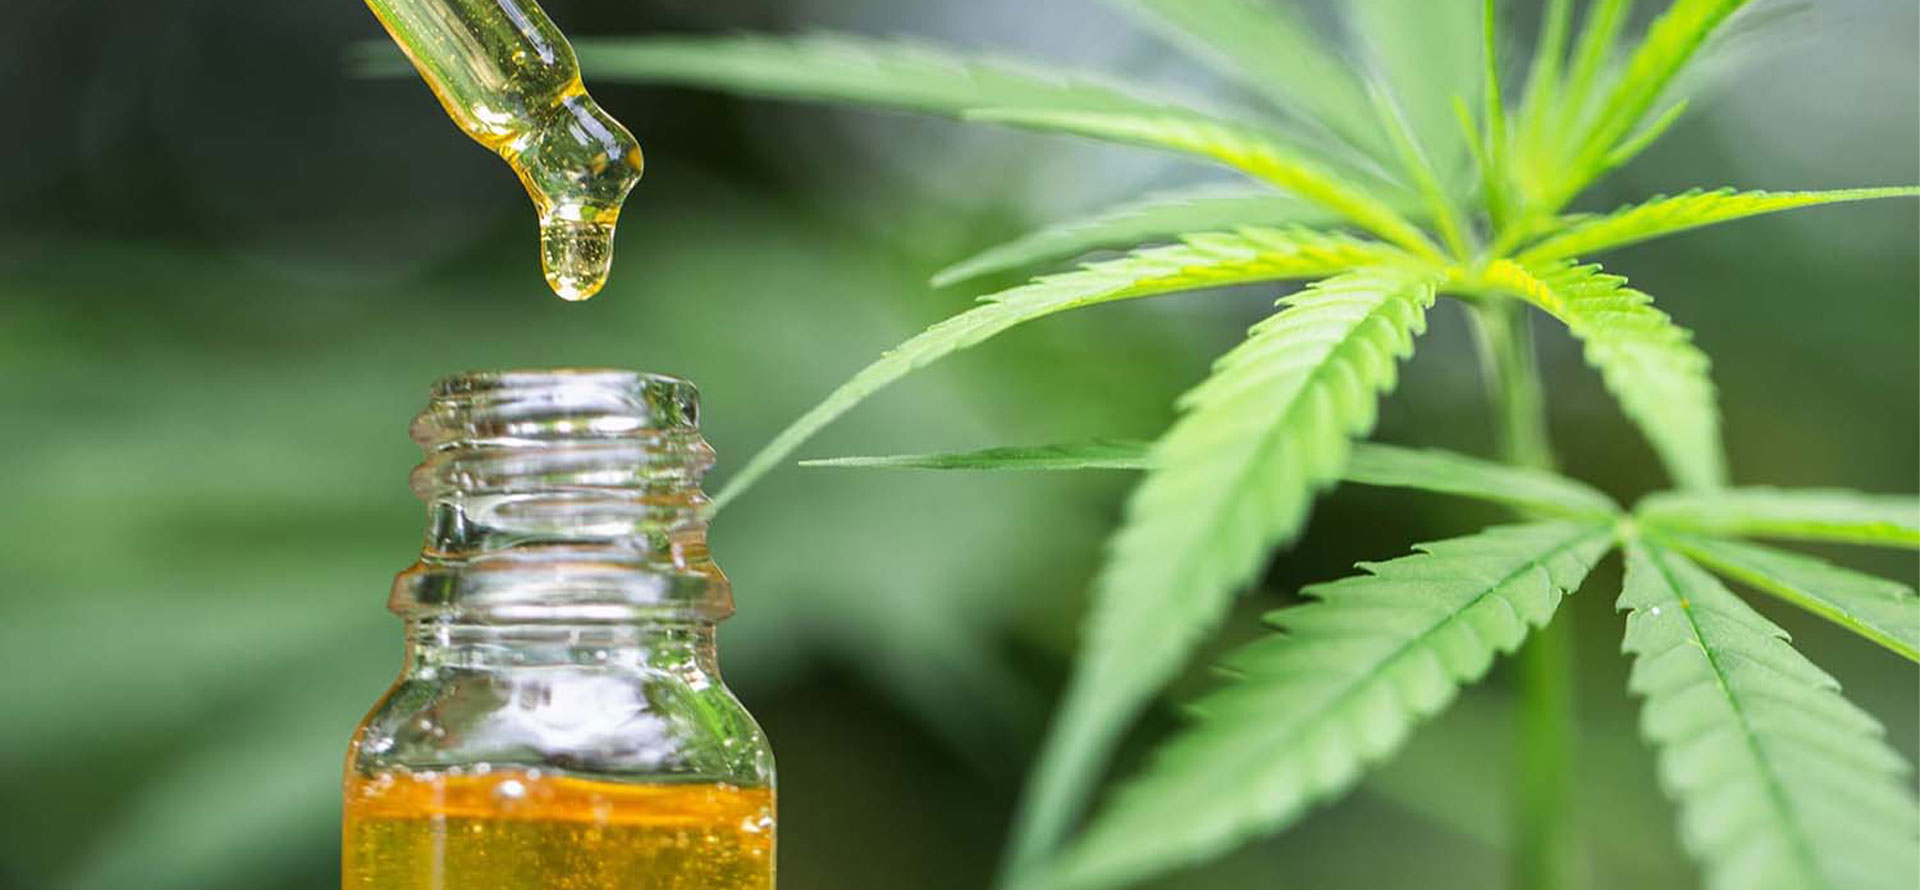 BUY HARLE-TSU CBC OIL FROM COLORADO - Cbd|Oil|Benefits|Cbc|Effects|Pain|Study|Health|Thc|Products|Cannabinoids|Studies|Research|Anxiety|Cannabis|Symptoms|Evidence|People|System|Disease|Treatment|Inflammation|Hemp|Body|Receptors|Disorders|Brain|Plant|Cells|Side|Effect|Blood|Patients|Cancer|Product|Skin|Marijuana|Properties|Cannabidiol|Cannabinoid|Cbd Oil|Cbd Products|Cbc Oil|Side Effects|Endocannabinoid System|Chronic Pain|Multiple Sclerosis|Pain Relief|Cannabis Plant|Cbd Oil Benefits|Blood Pressure|Health Benefits|High Blood Pressure|Anti-Inflammatory Properties|Neuropathic Pain|Animal Studies|Hemp Plant|Hemp Oil|Anxiety Disorders|Cbd Product|Immune System|Clinical Trials|Cbd Gummies|Nerve Cells|Nervous System|Entourage Effect|Hemp Seed Oil|United States|Cbd Oils|Drug Administration